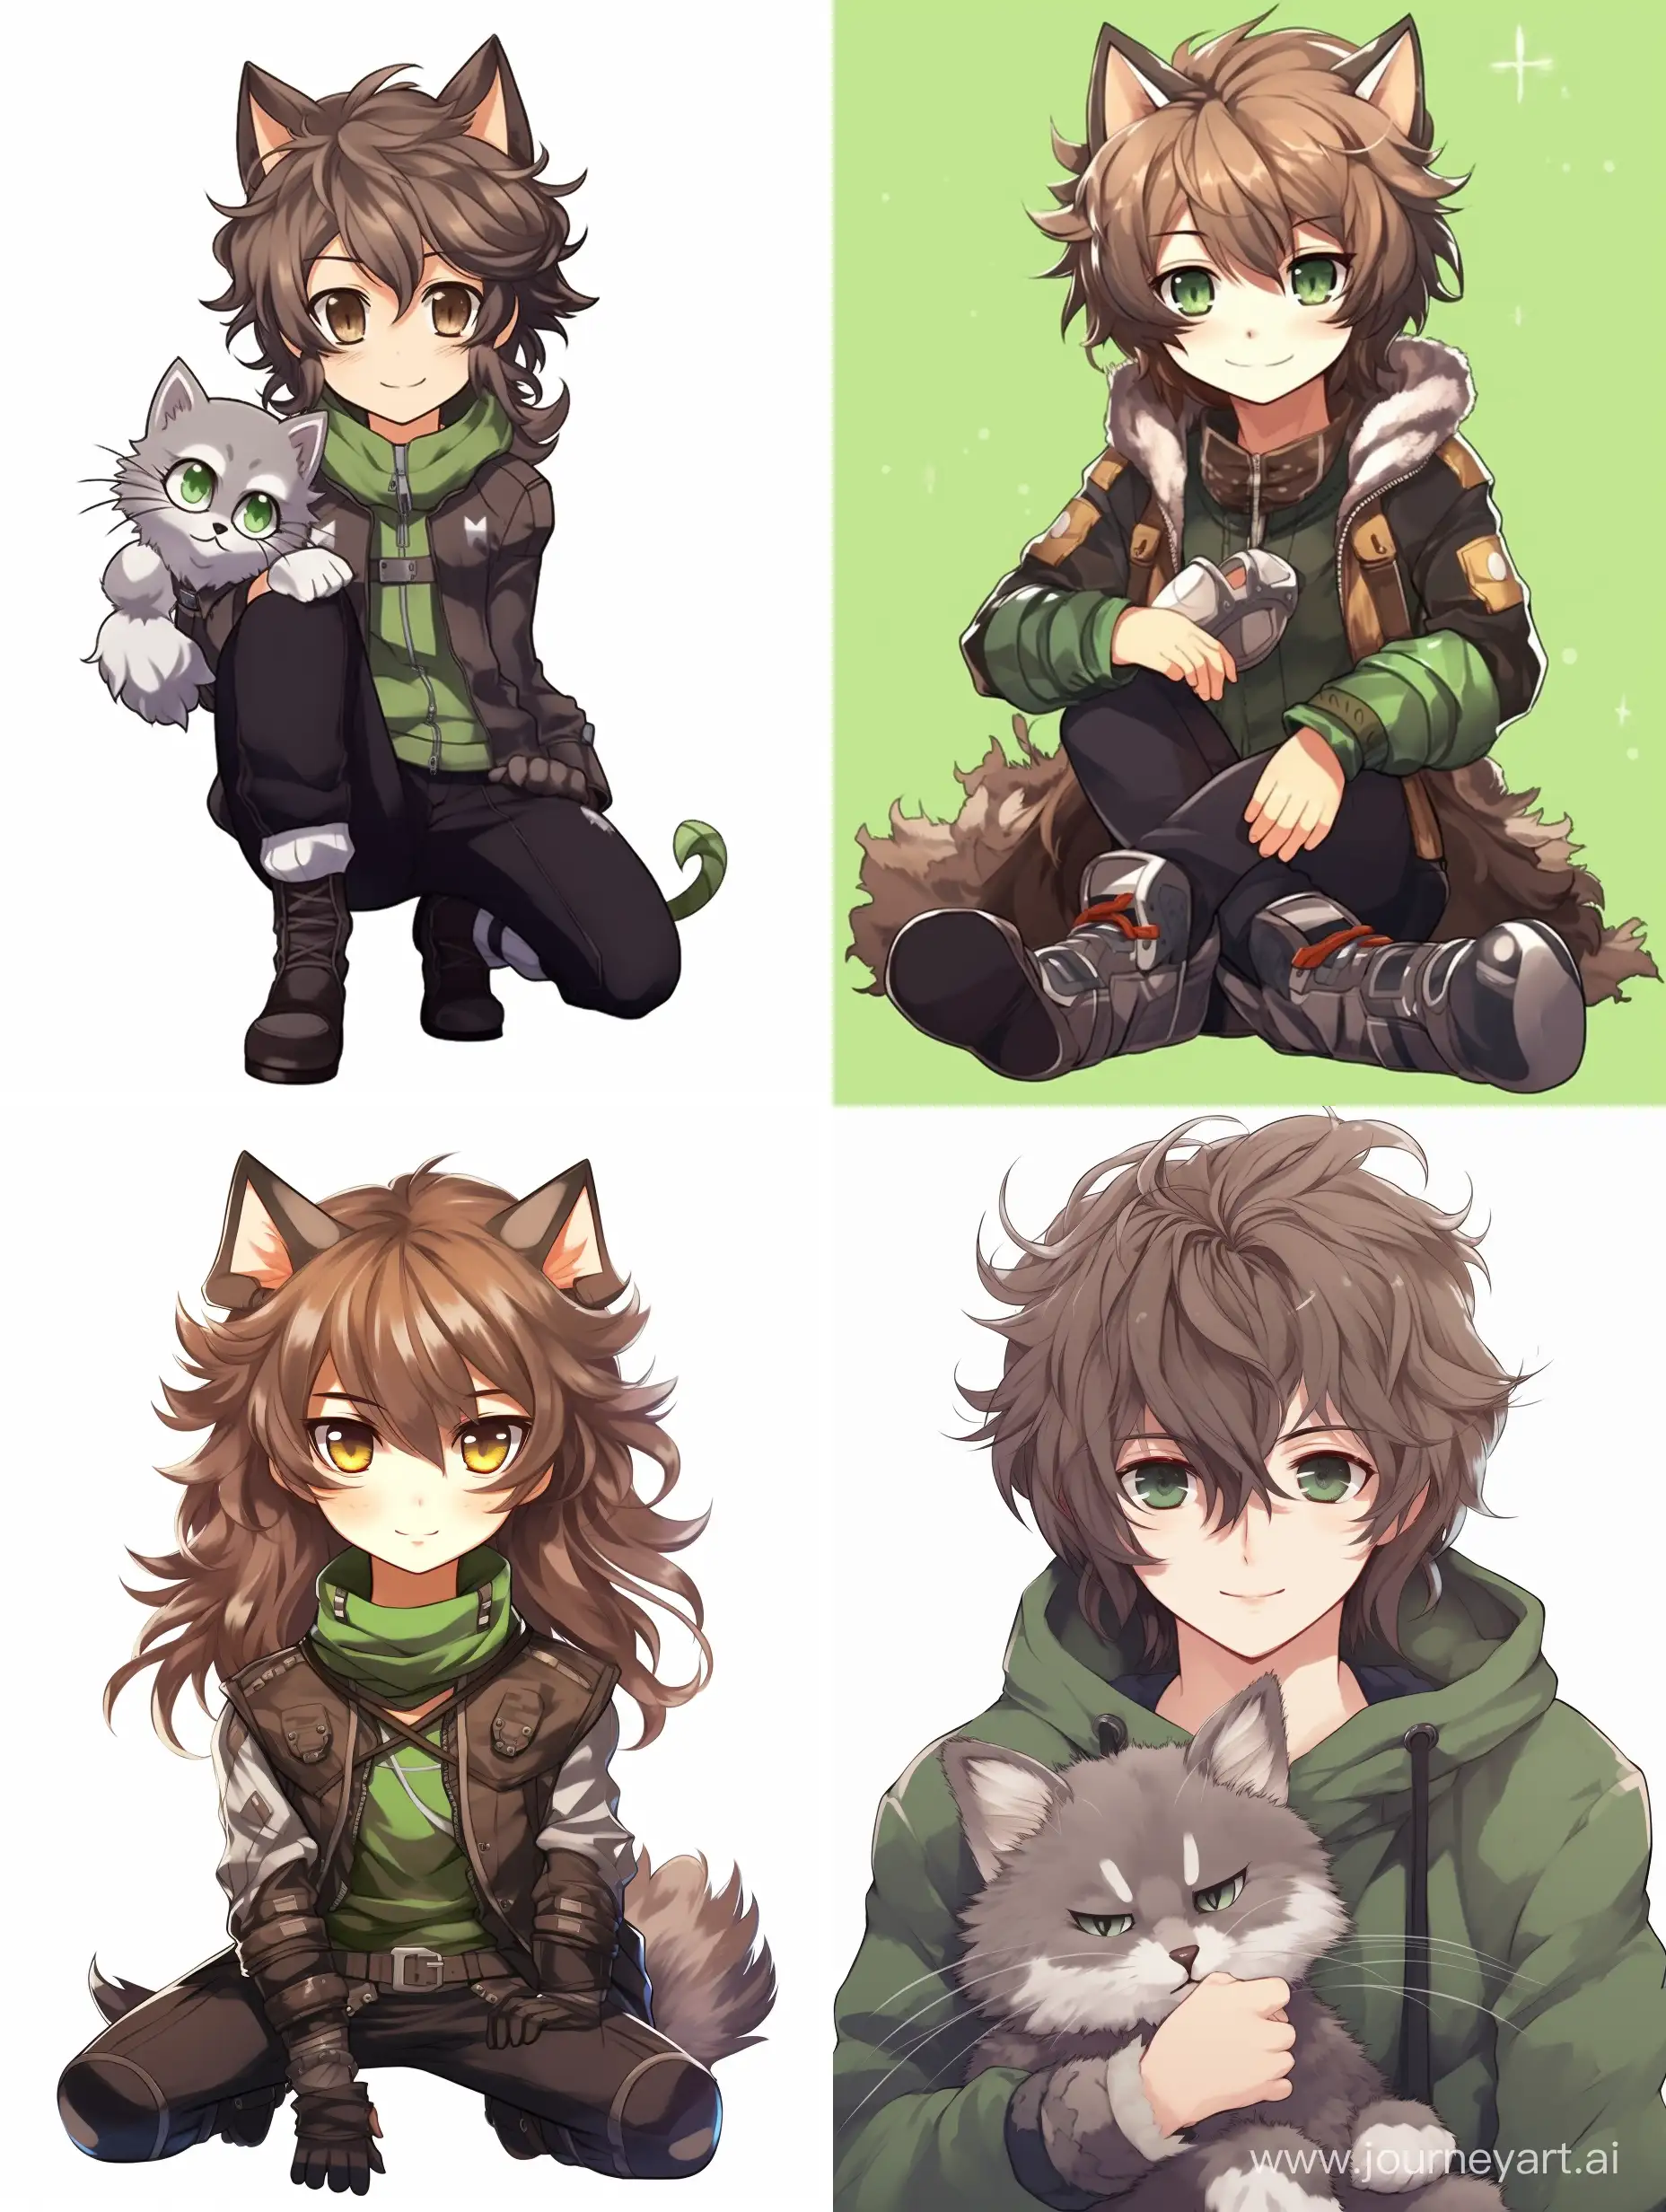 boy, brown long hair, brown cat ears with green fluff inside, green eyes, gray T-shirt on top, gray biker gloves, green fluffy fox tail, flat background, full body, anime, one creature